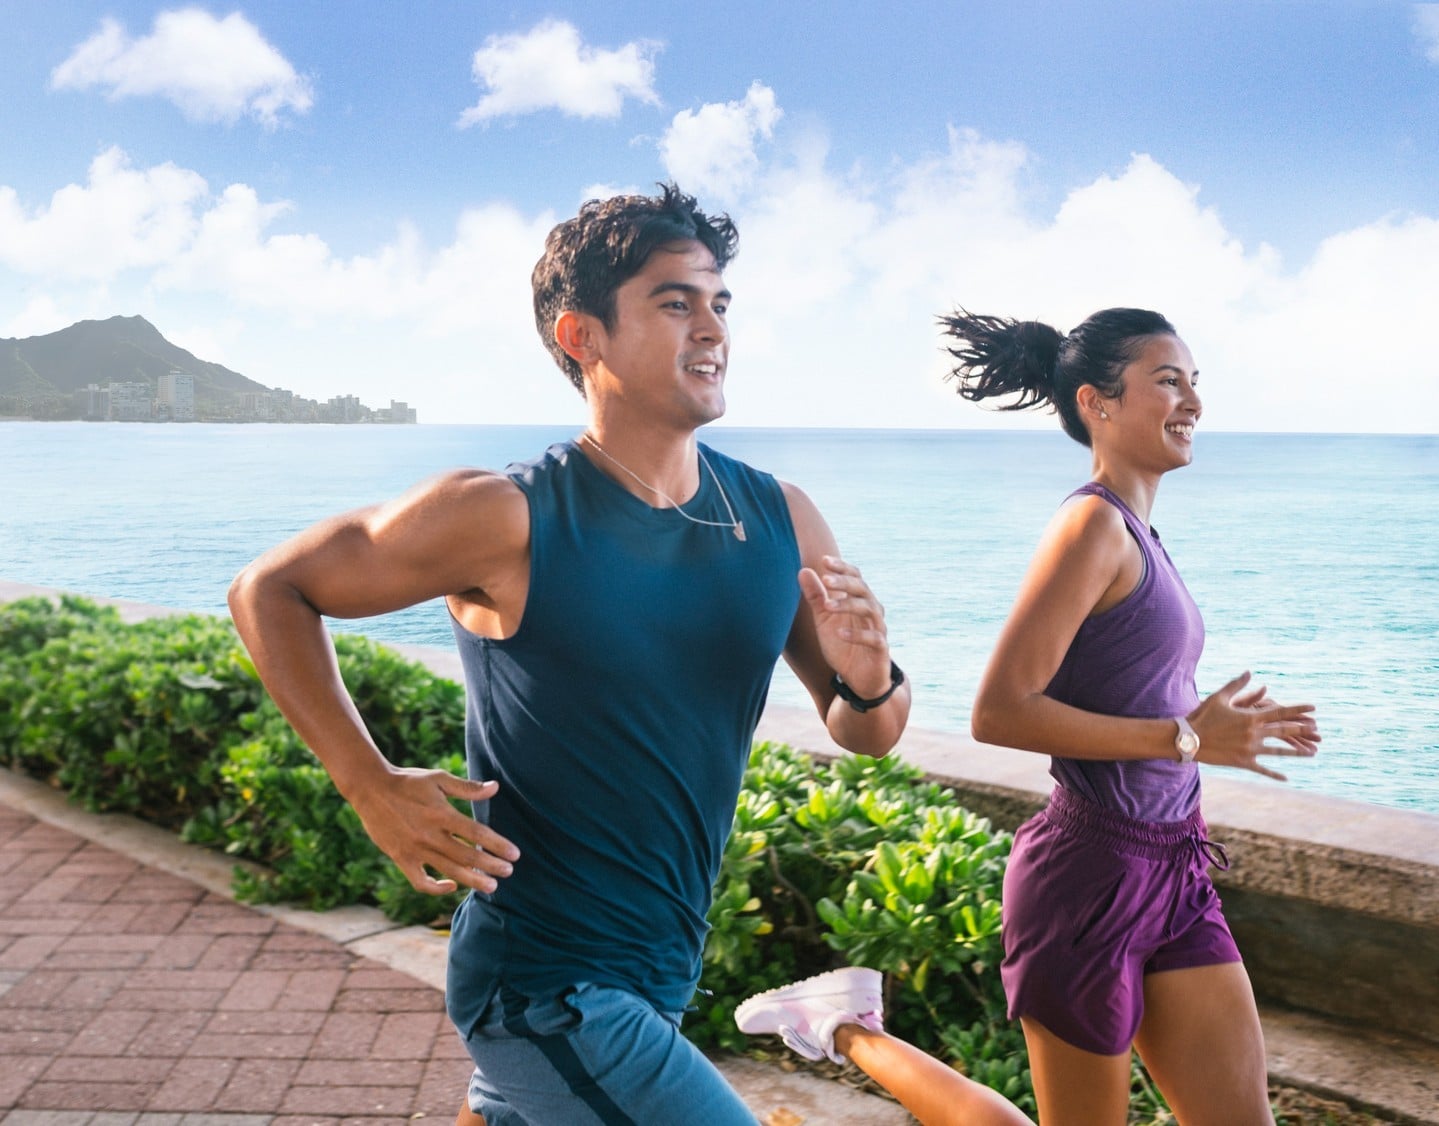 In a recent article from @innerbody, Honolulu was ranked the #1 “Fittest City” in the nation with nearly 17 fitness centers per 10,000 residents. At Ward Village, we’re proud to provide a range of outdoor green spaces, bike lanes and wide sidewalks for the community to enjoy, including weekly yoga and pilates at Victoria Ward Park, as well as fitness studios at CorePower Yoga, F45 and Club Pilates, coming soon. #hawaii #fitness #wardvillage